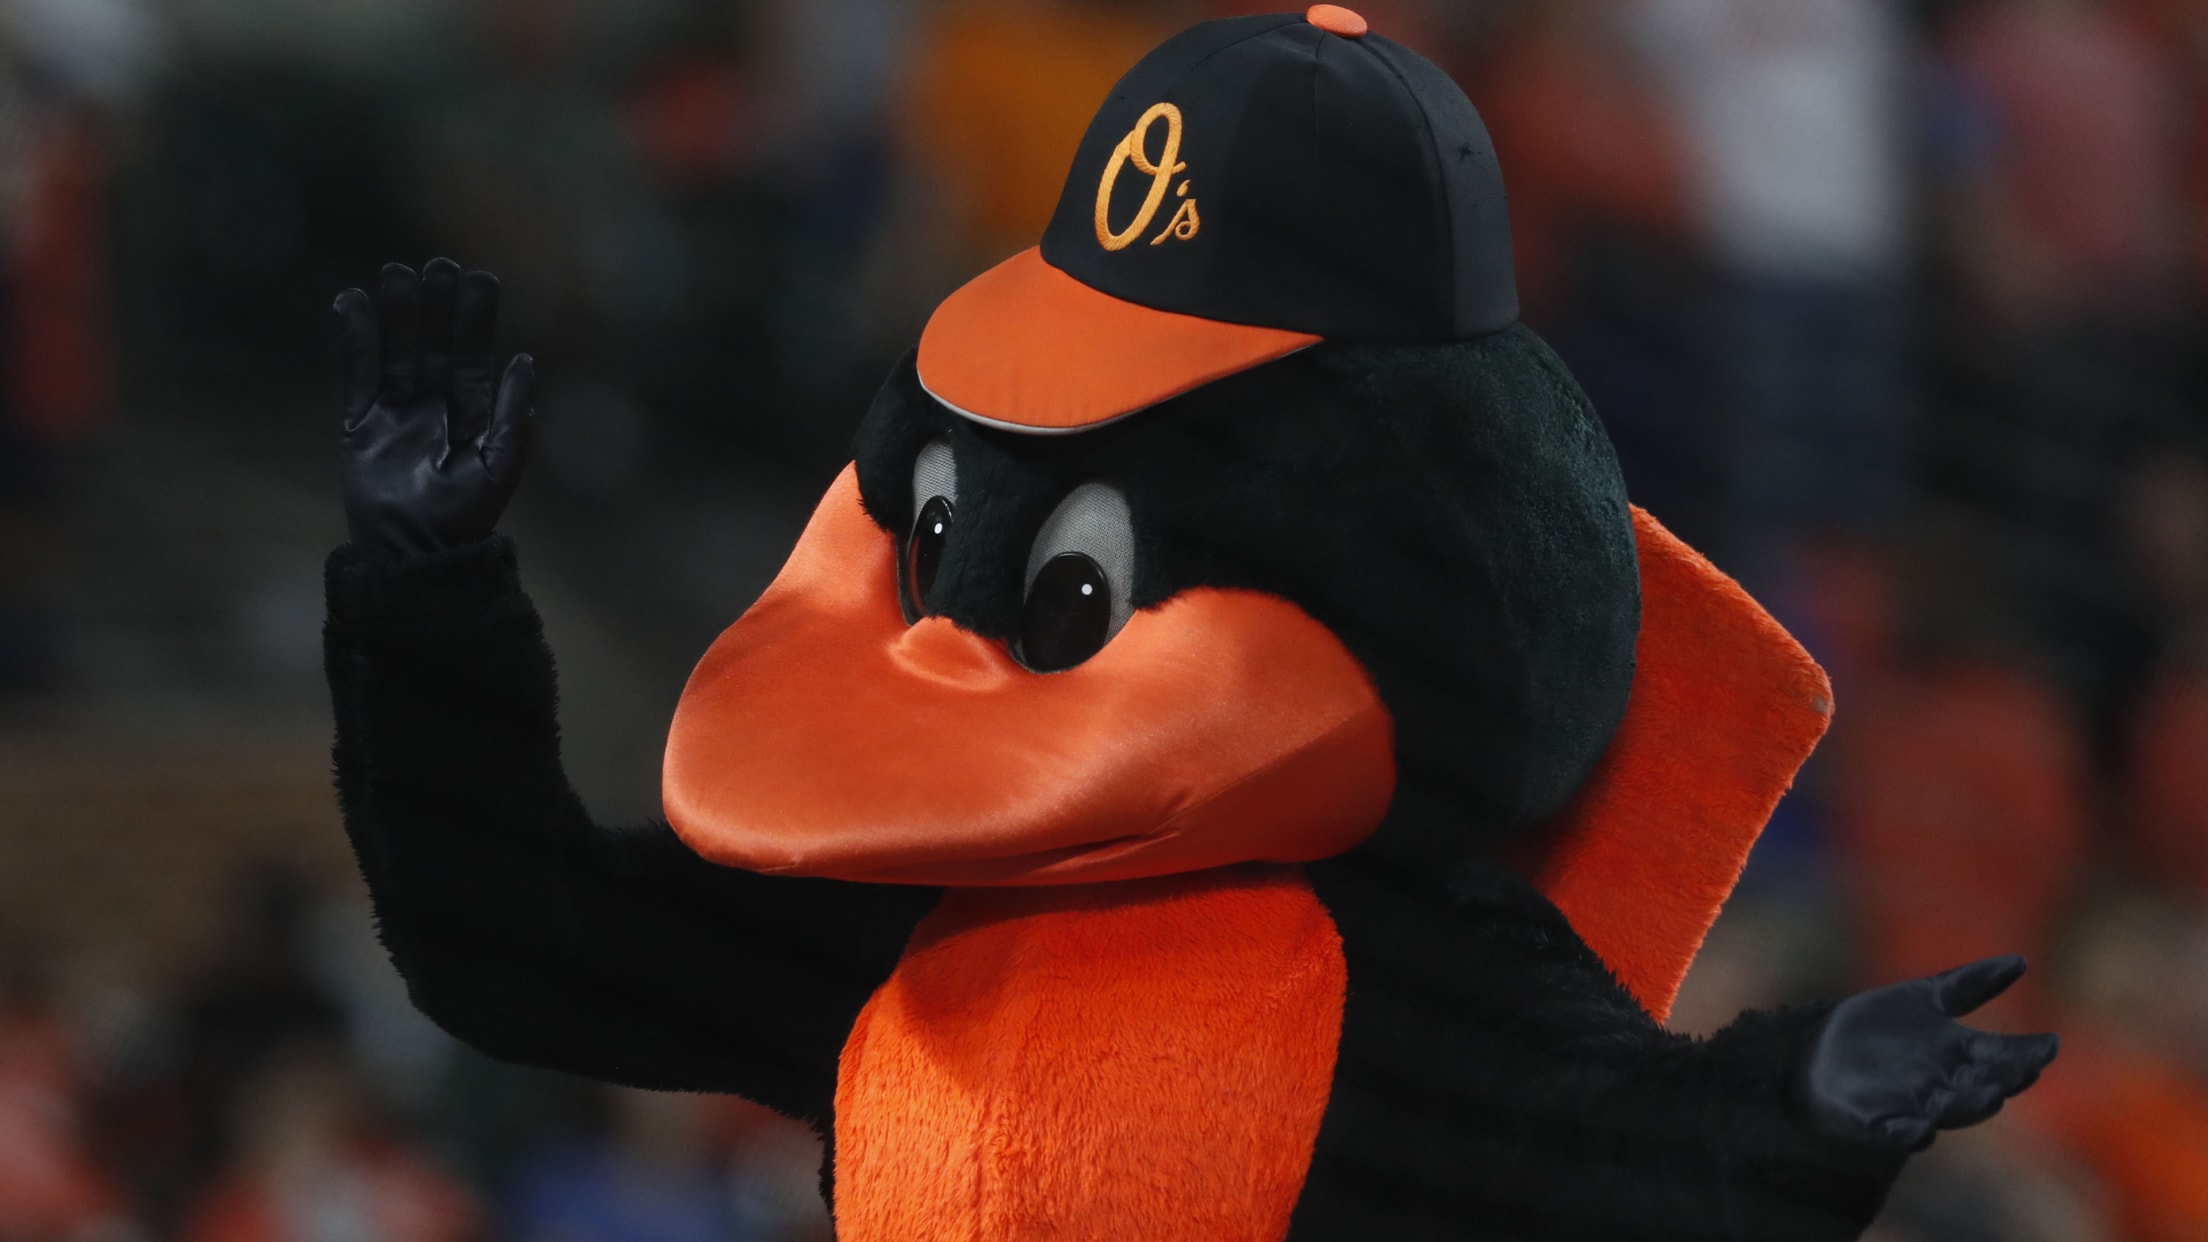 Birdland Insider: Oriole Bird Inducted to Mascot Hall of Fame